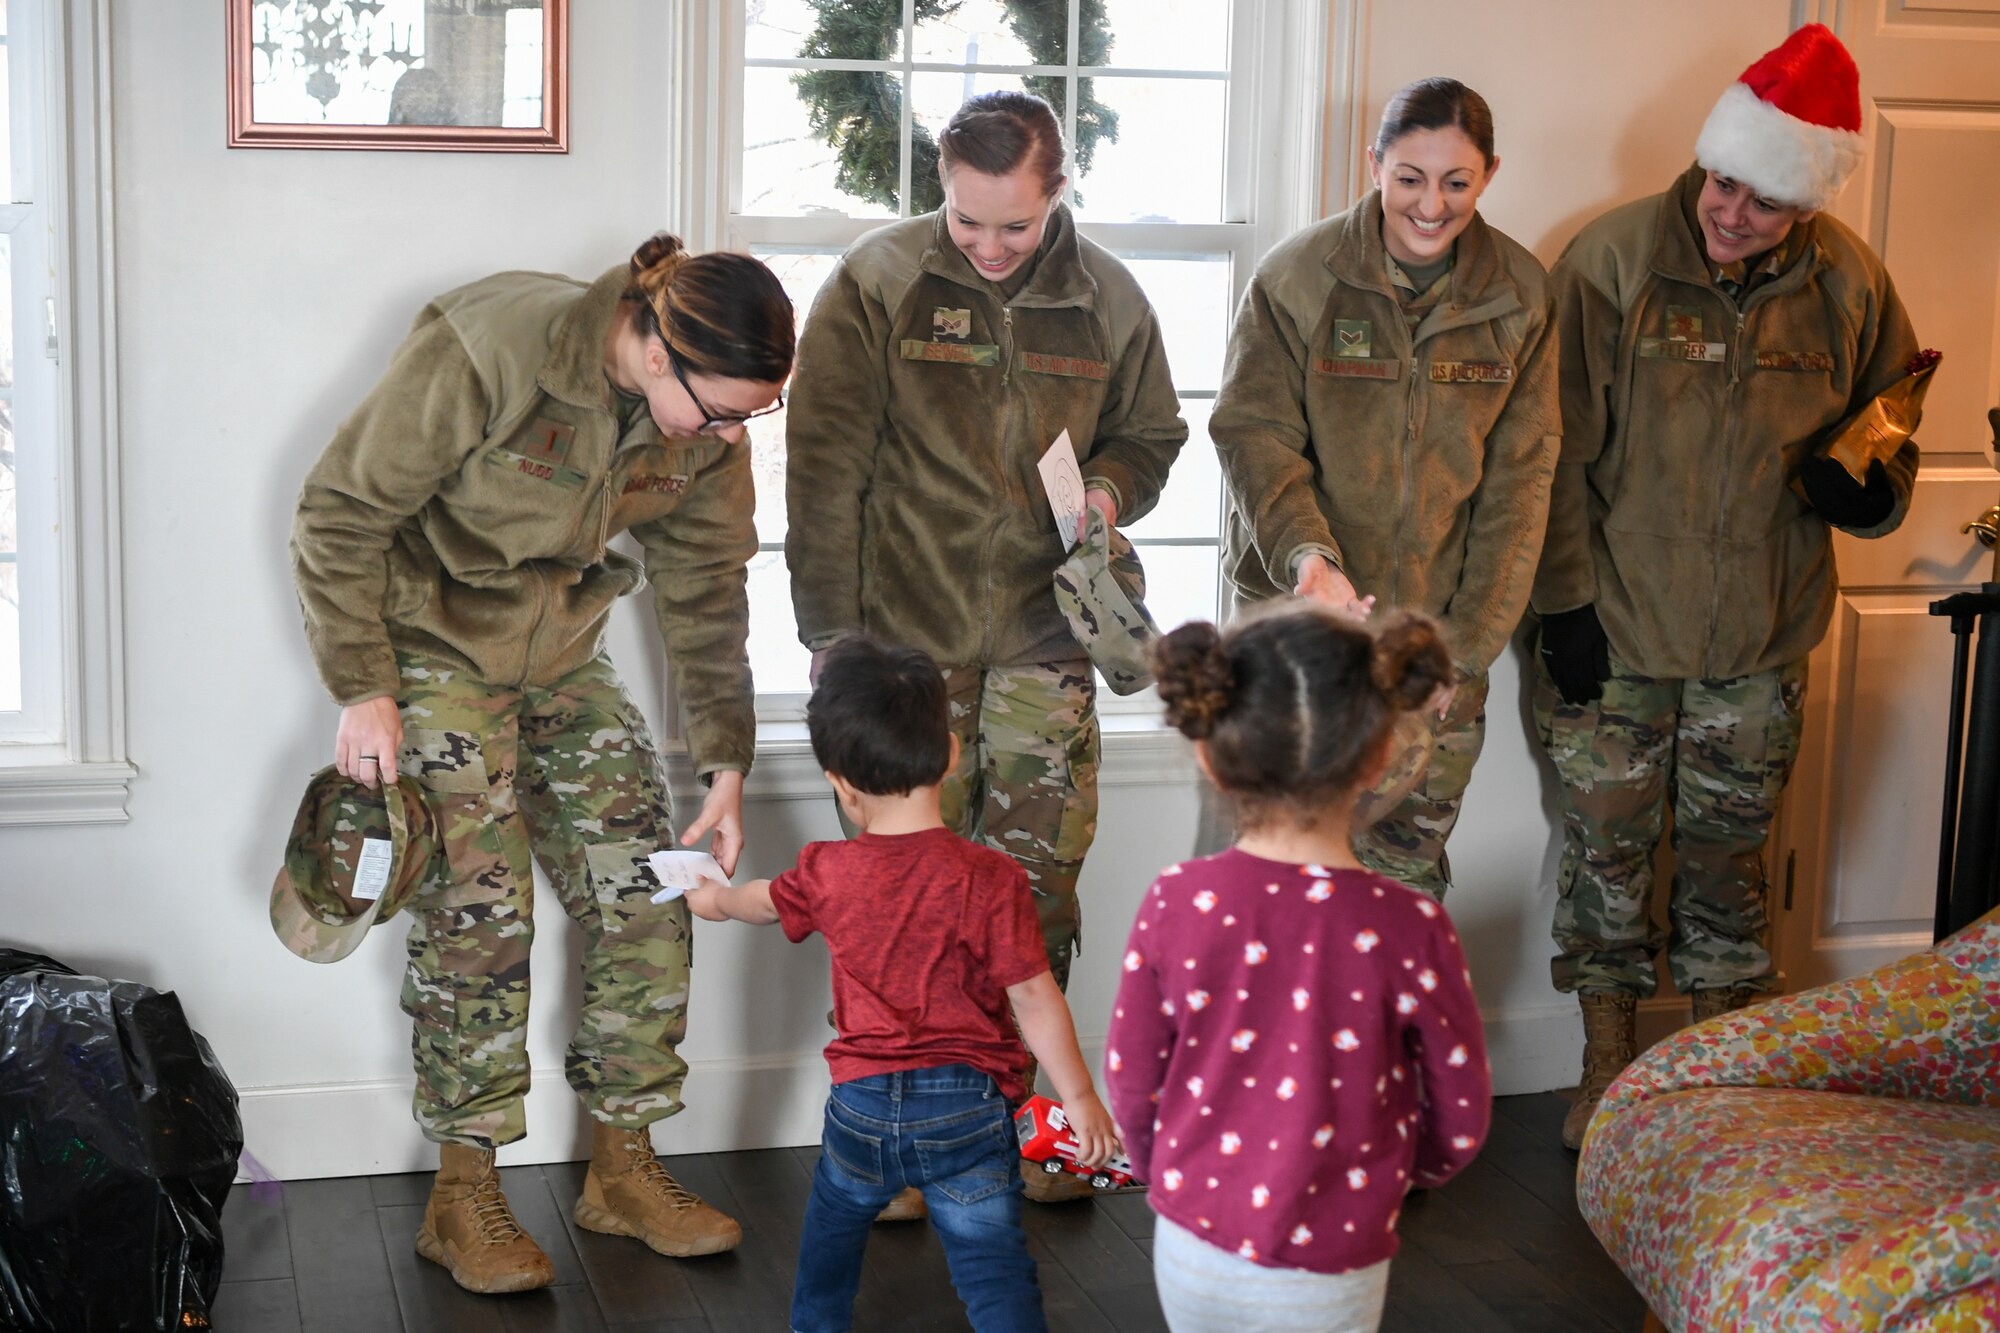 (Left to right) 2nd Lt. Kassidi Nudd, Senior Airmen Hayley Sewell, Senior Airman Brianne Chapman, and Maj. Christy Fetzer, 419th Fighter Wing, receive cards from foster children after delivering gifts Dec. 18, 2019, as part of a volunteer effort called Santa Brigade, a joint venture with Utah Foster Care Foundation and volunteers from Hill Air Force Base, Utah.  Around 85 Airmen from various commands played Santa for the day delivering 537 gifts to over 140 foster care families around Northern Utah. (U.S. Air Force photo by Cynthia Griggs)